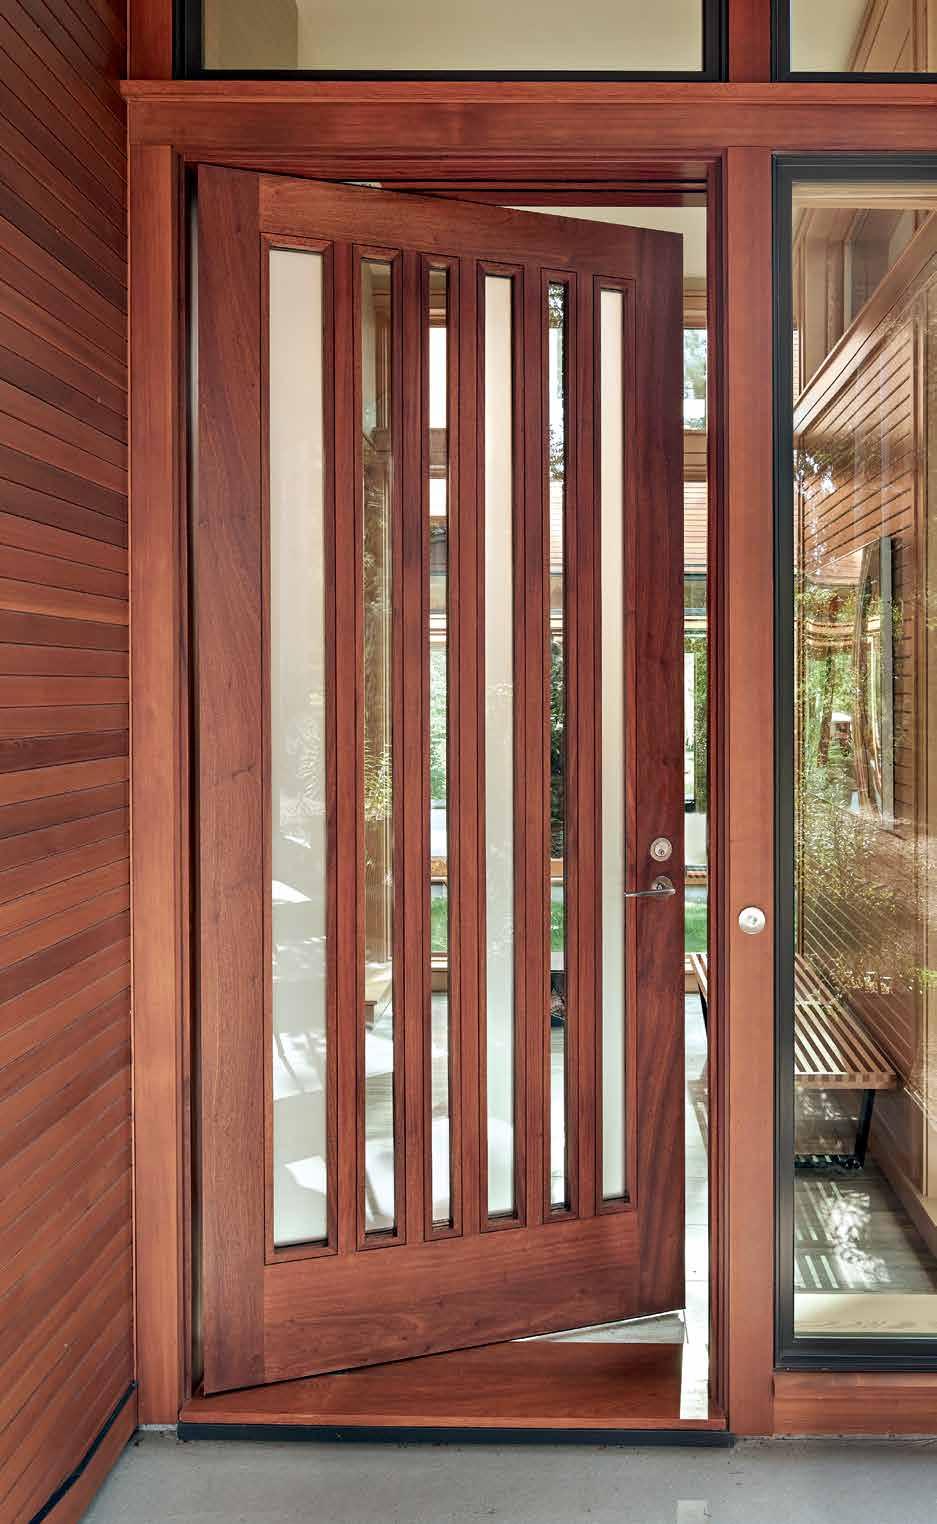 A custom entry door made of sapele wood with alternating vertical panels of etched and clear glass, from Lakeview Millworks, makes a striking first impression at the entrance to a Bend home designed